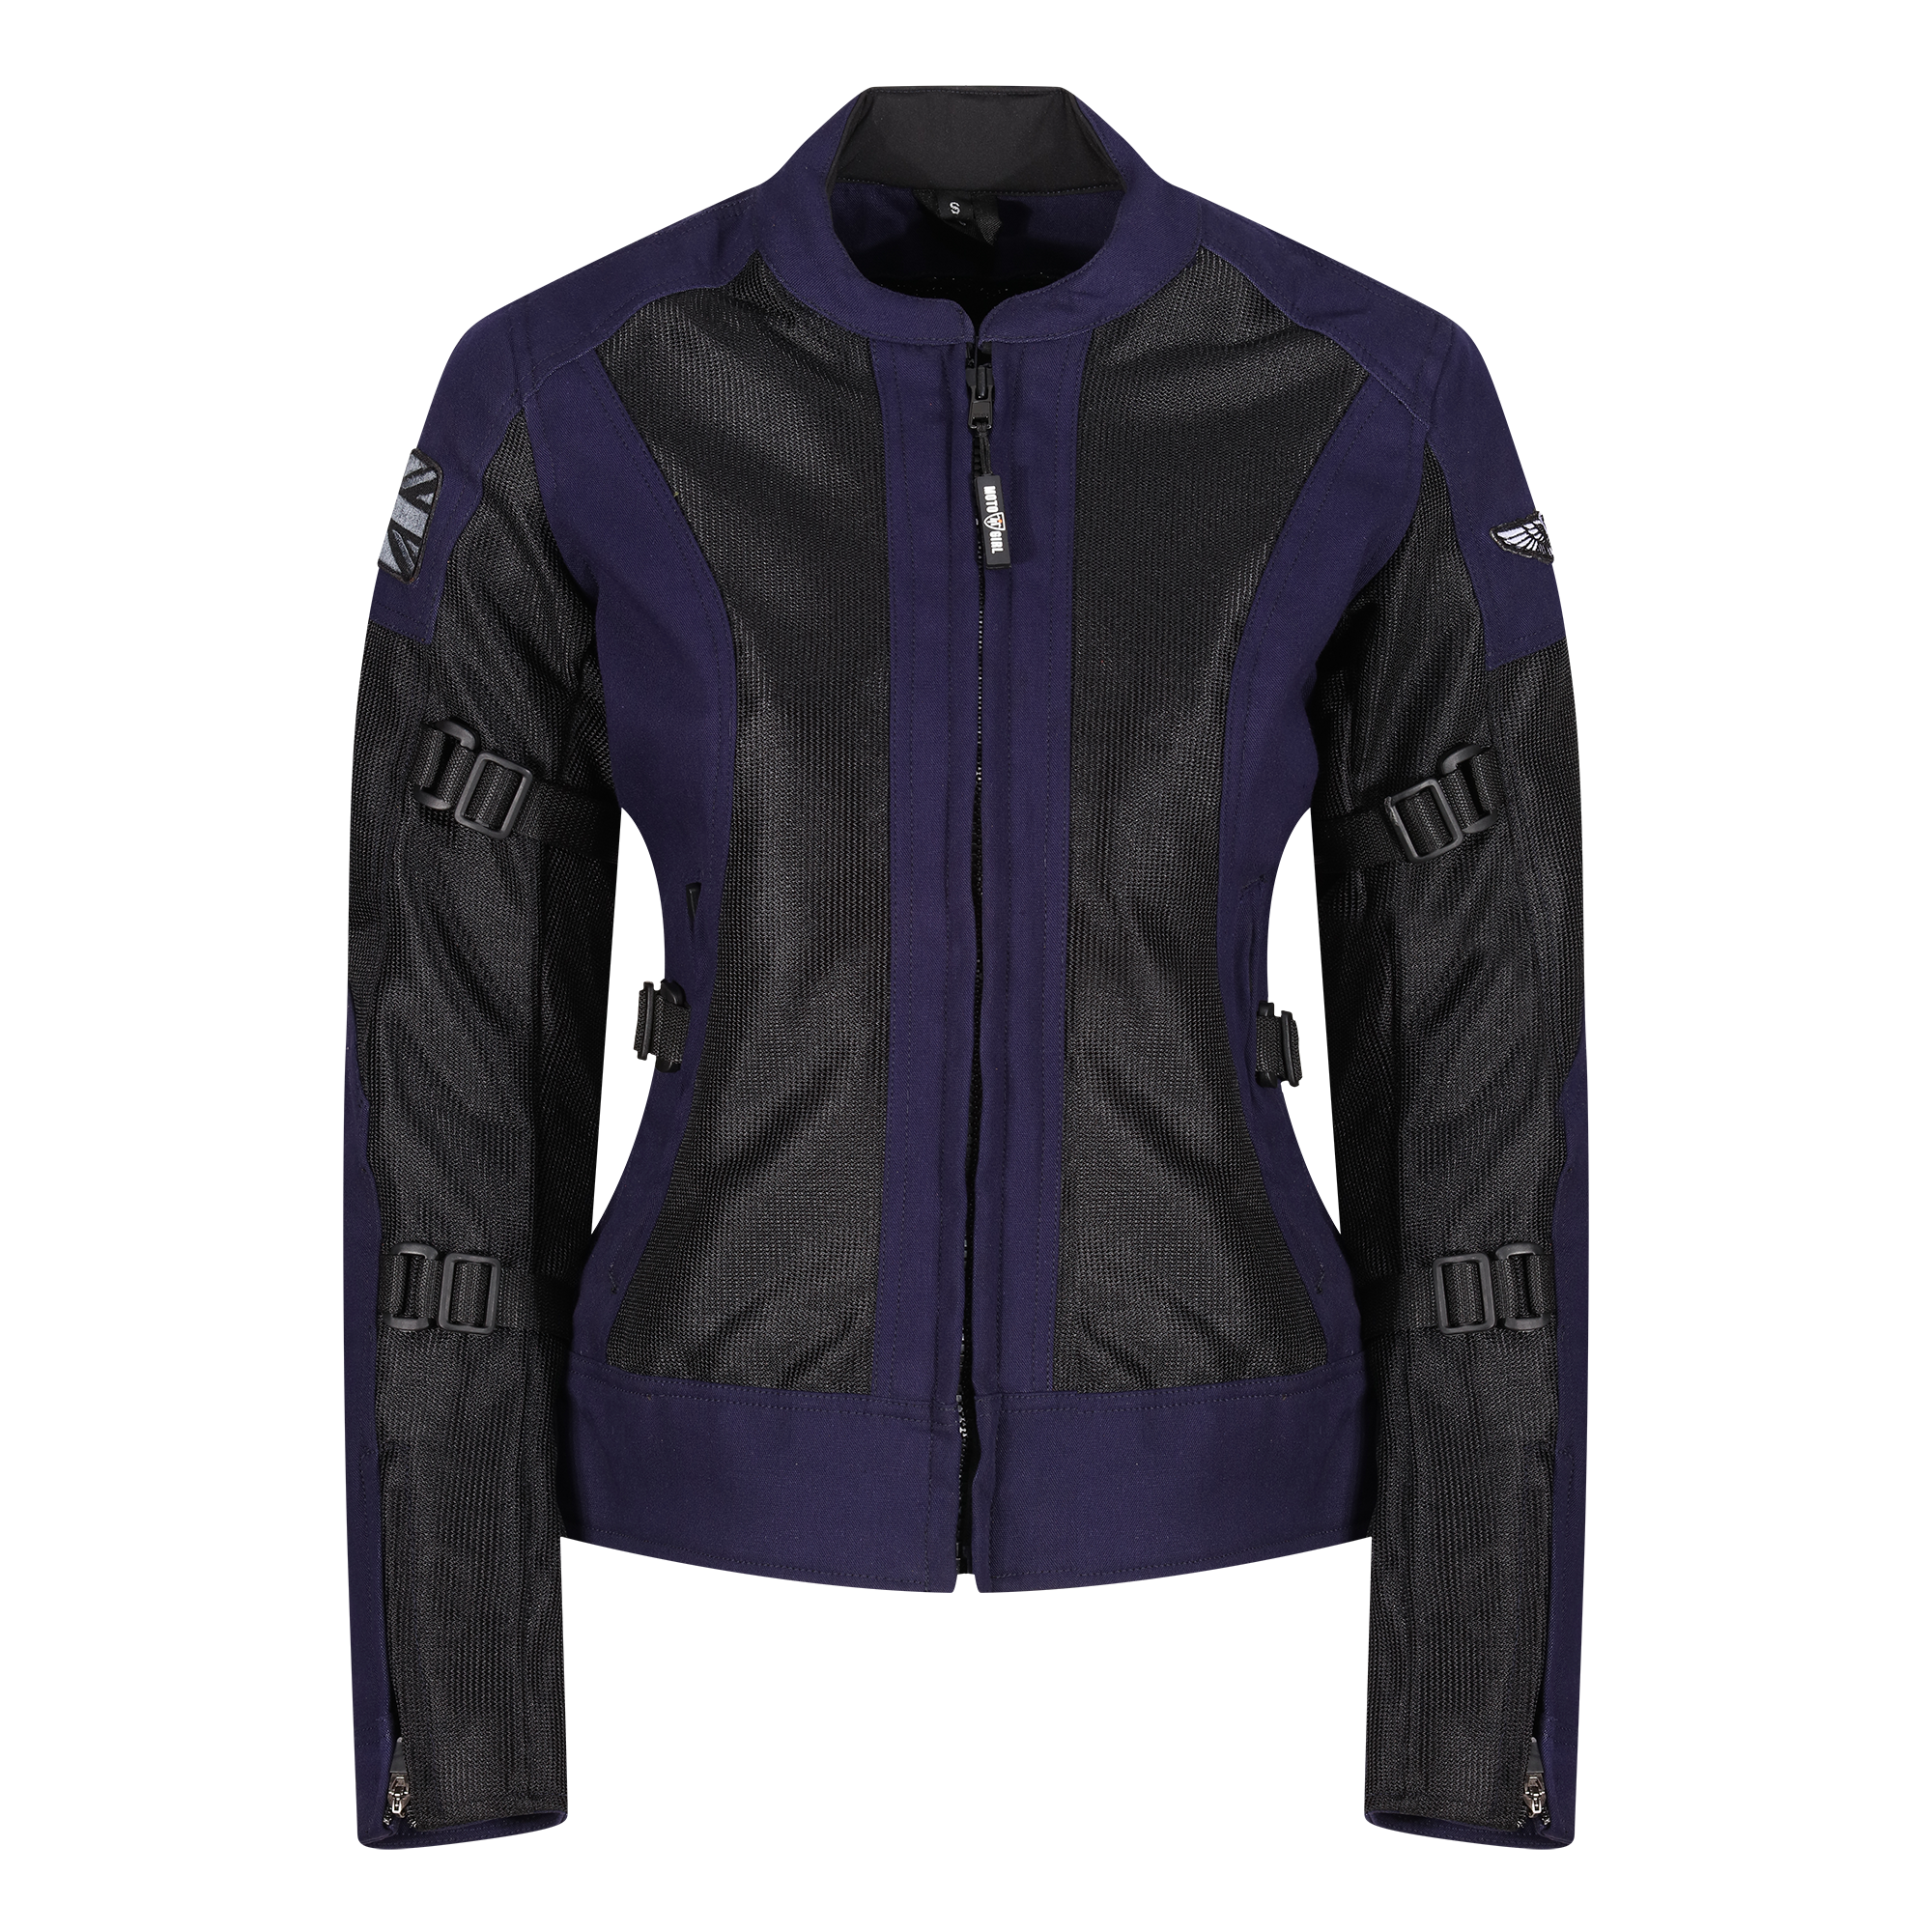 Blue and black women motorcycle mesh jacket from MotoGirl 